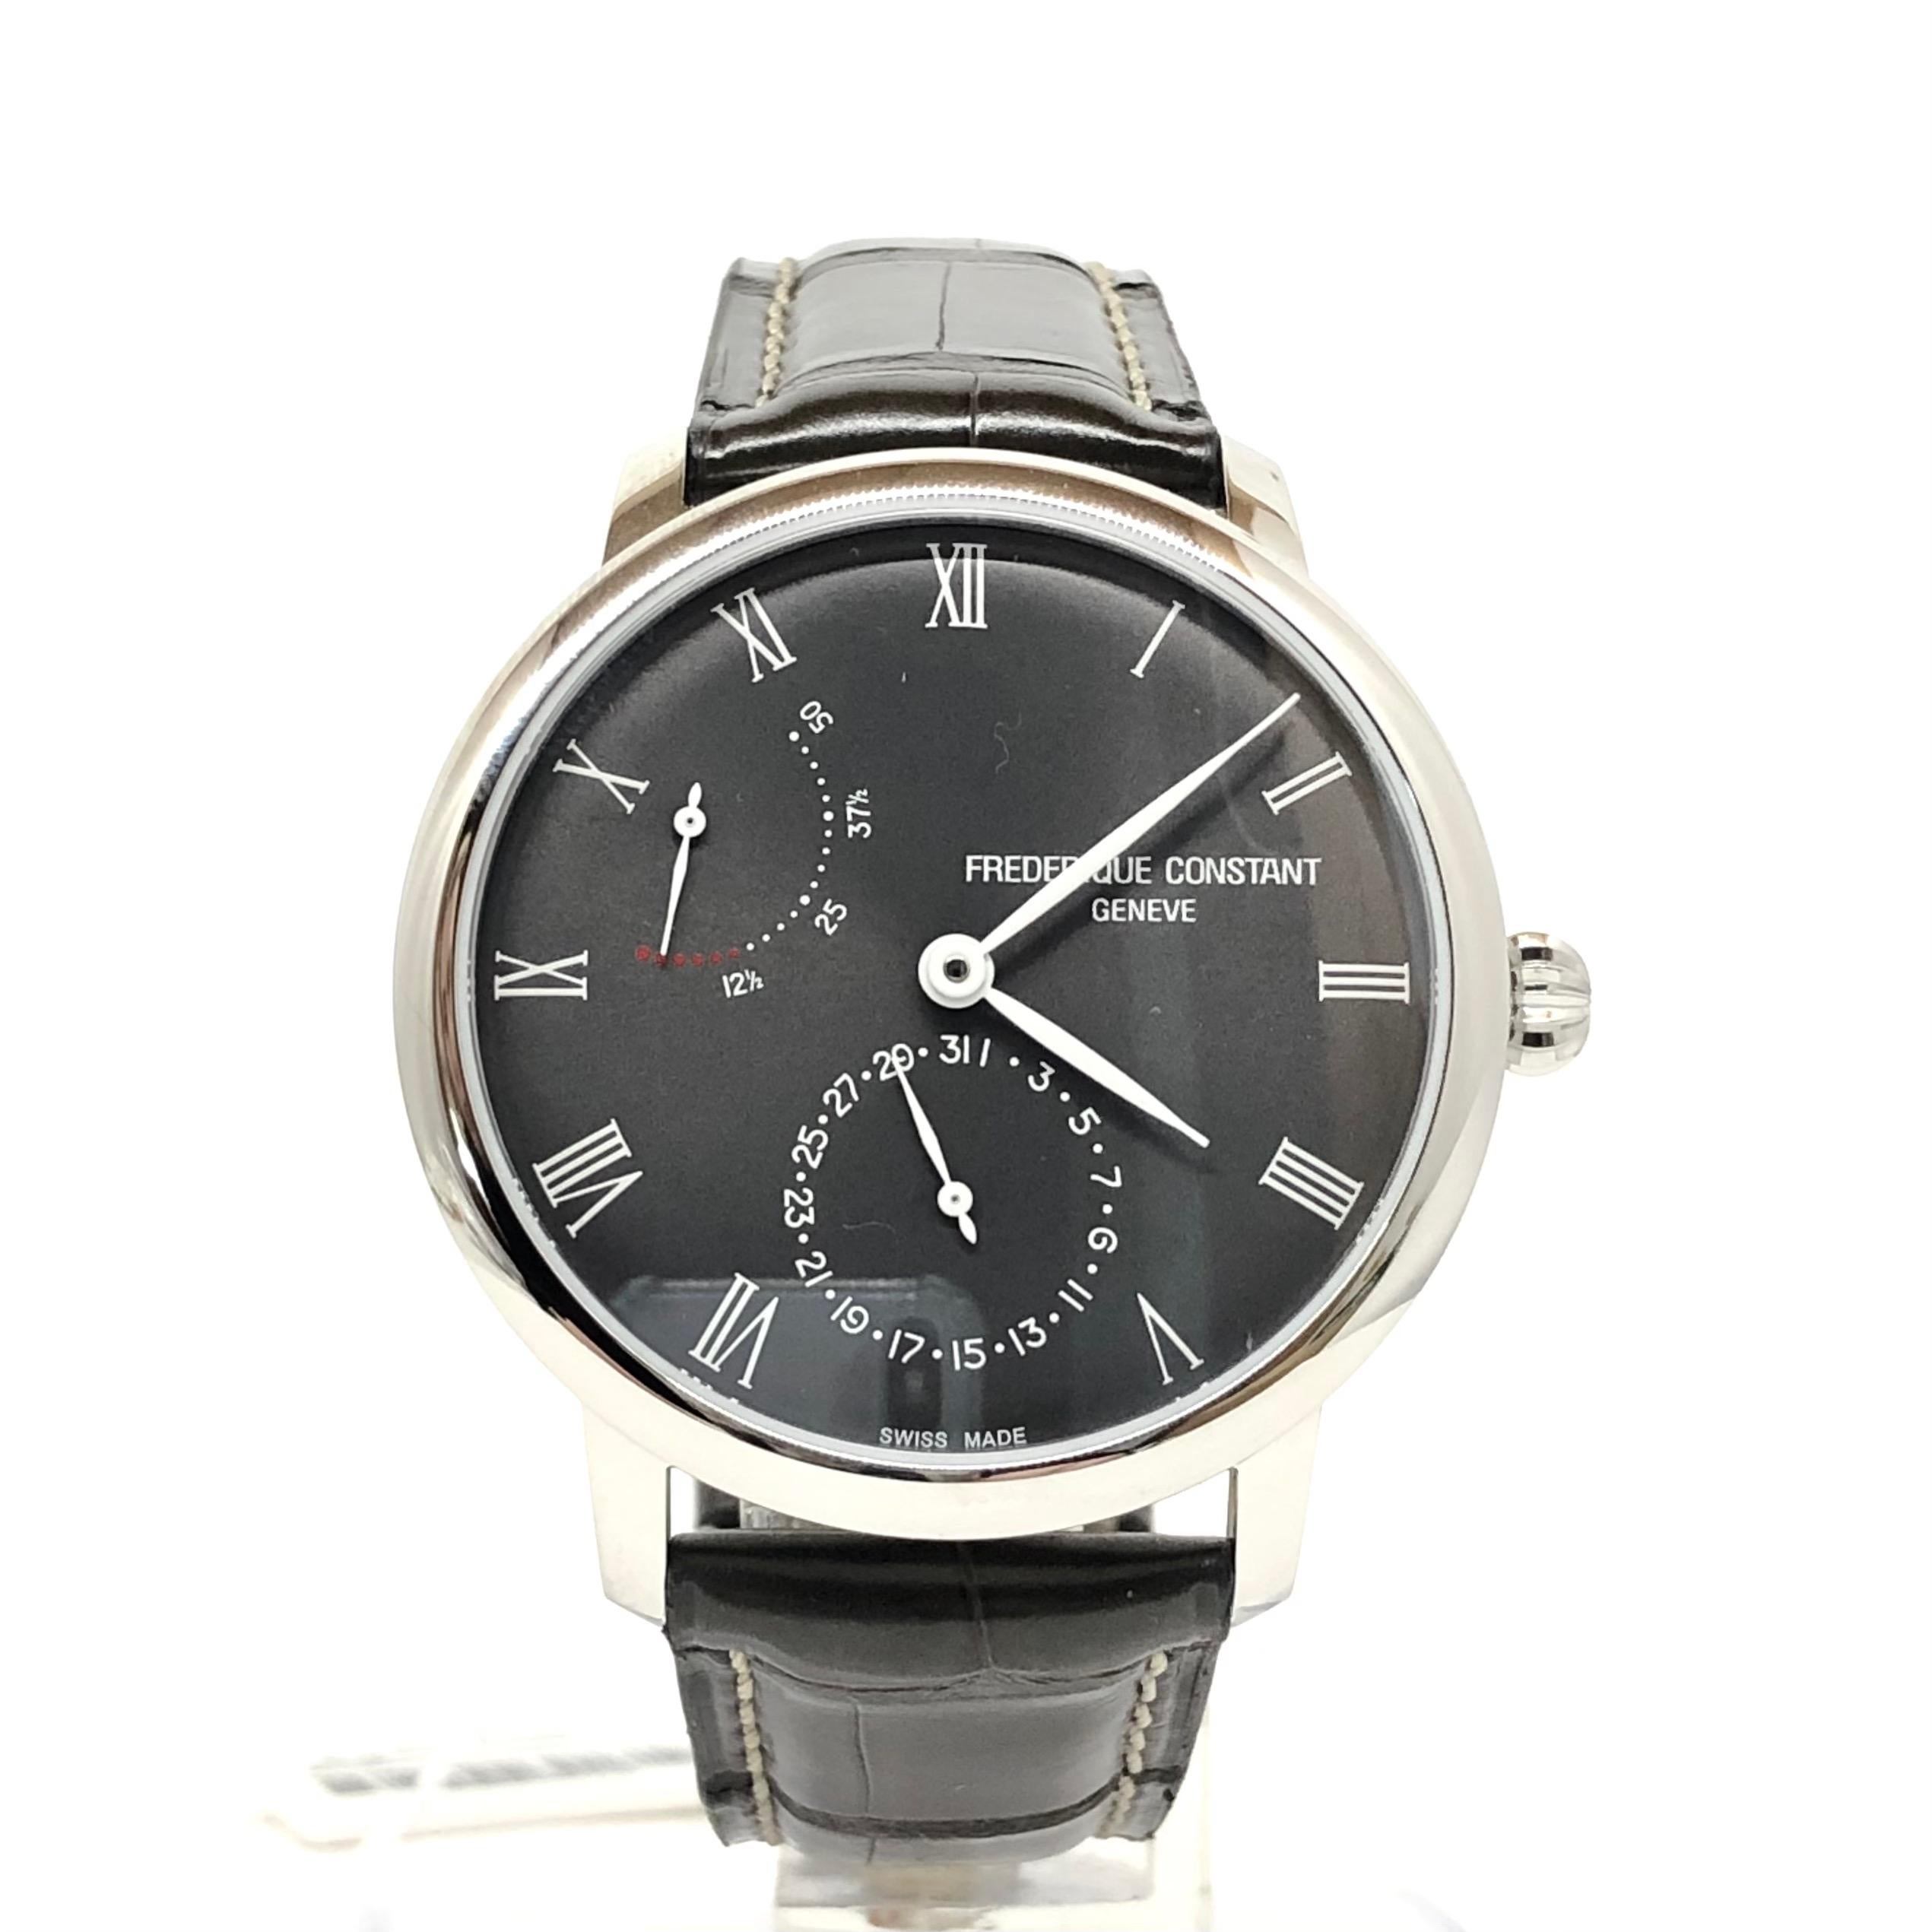 This Men’s watch has a 40 mm round stainless steel case with fixed bezel. Dark grey dial with and silver-tone leaf-style shape hands & Roman numerals hour markers. The date display at 6 o’clock and the power reserve indicator at 10 o’clock position.